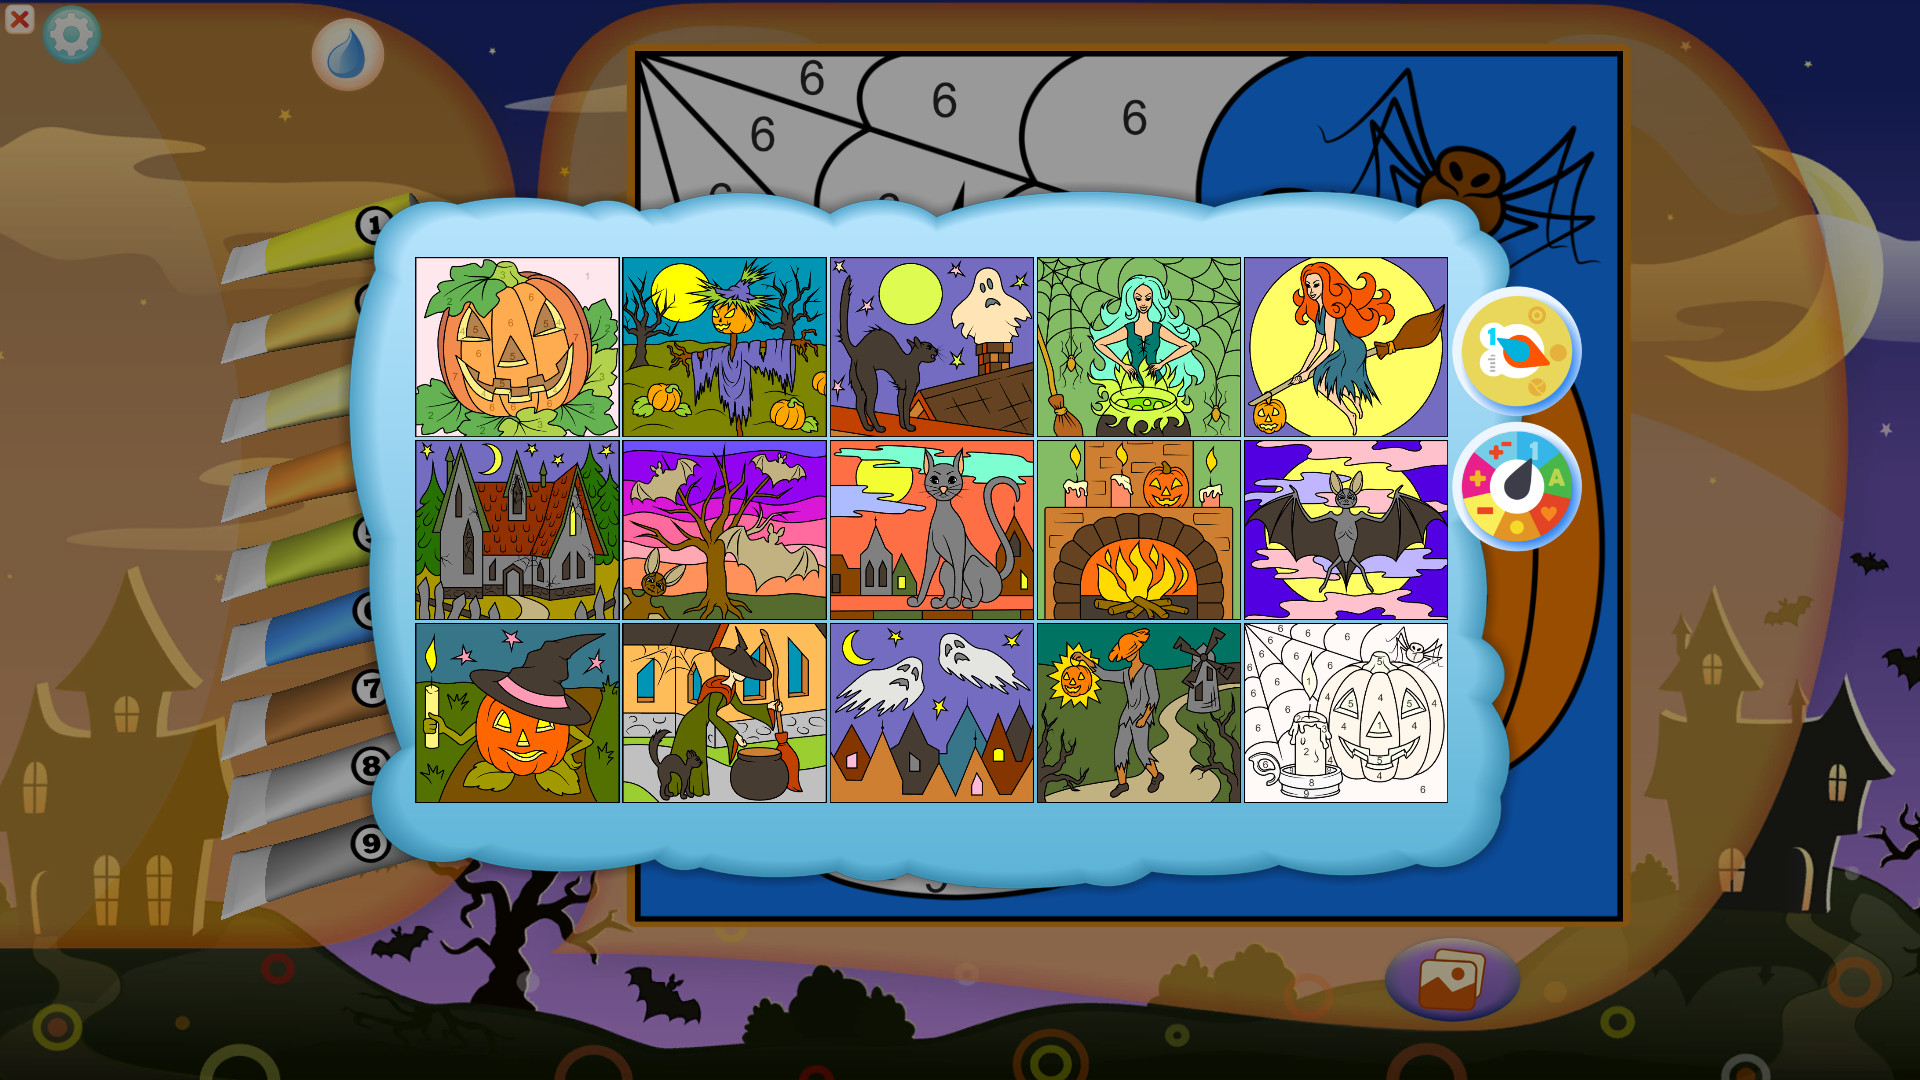 Color by Numbers - Halloween Free Download